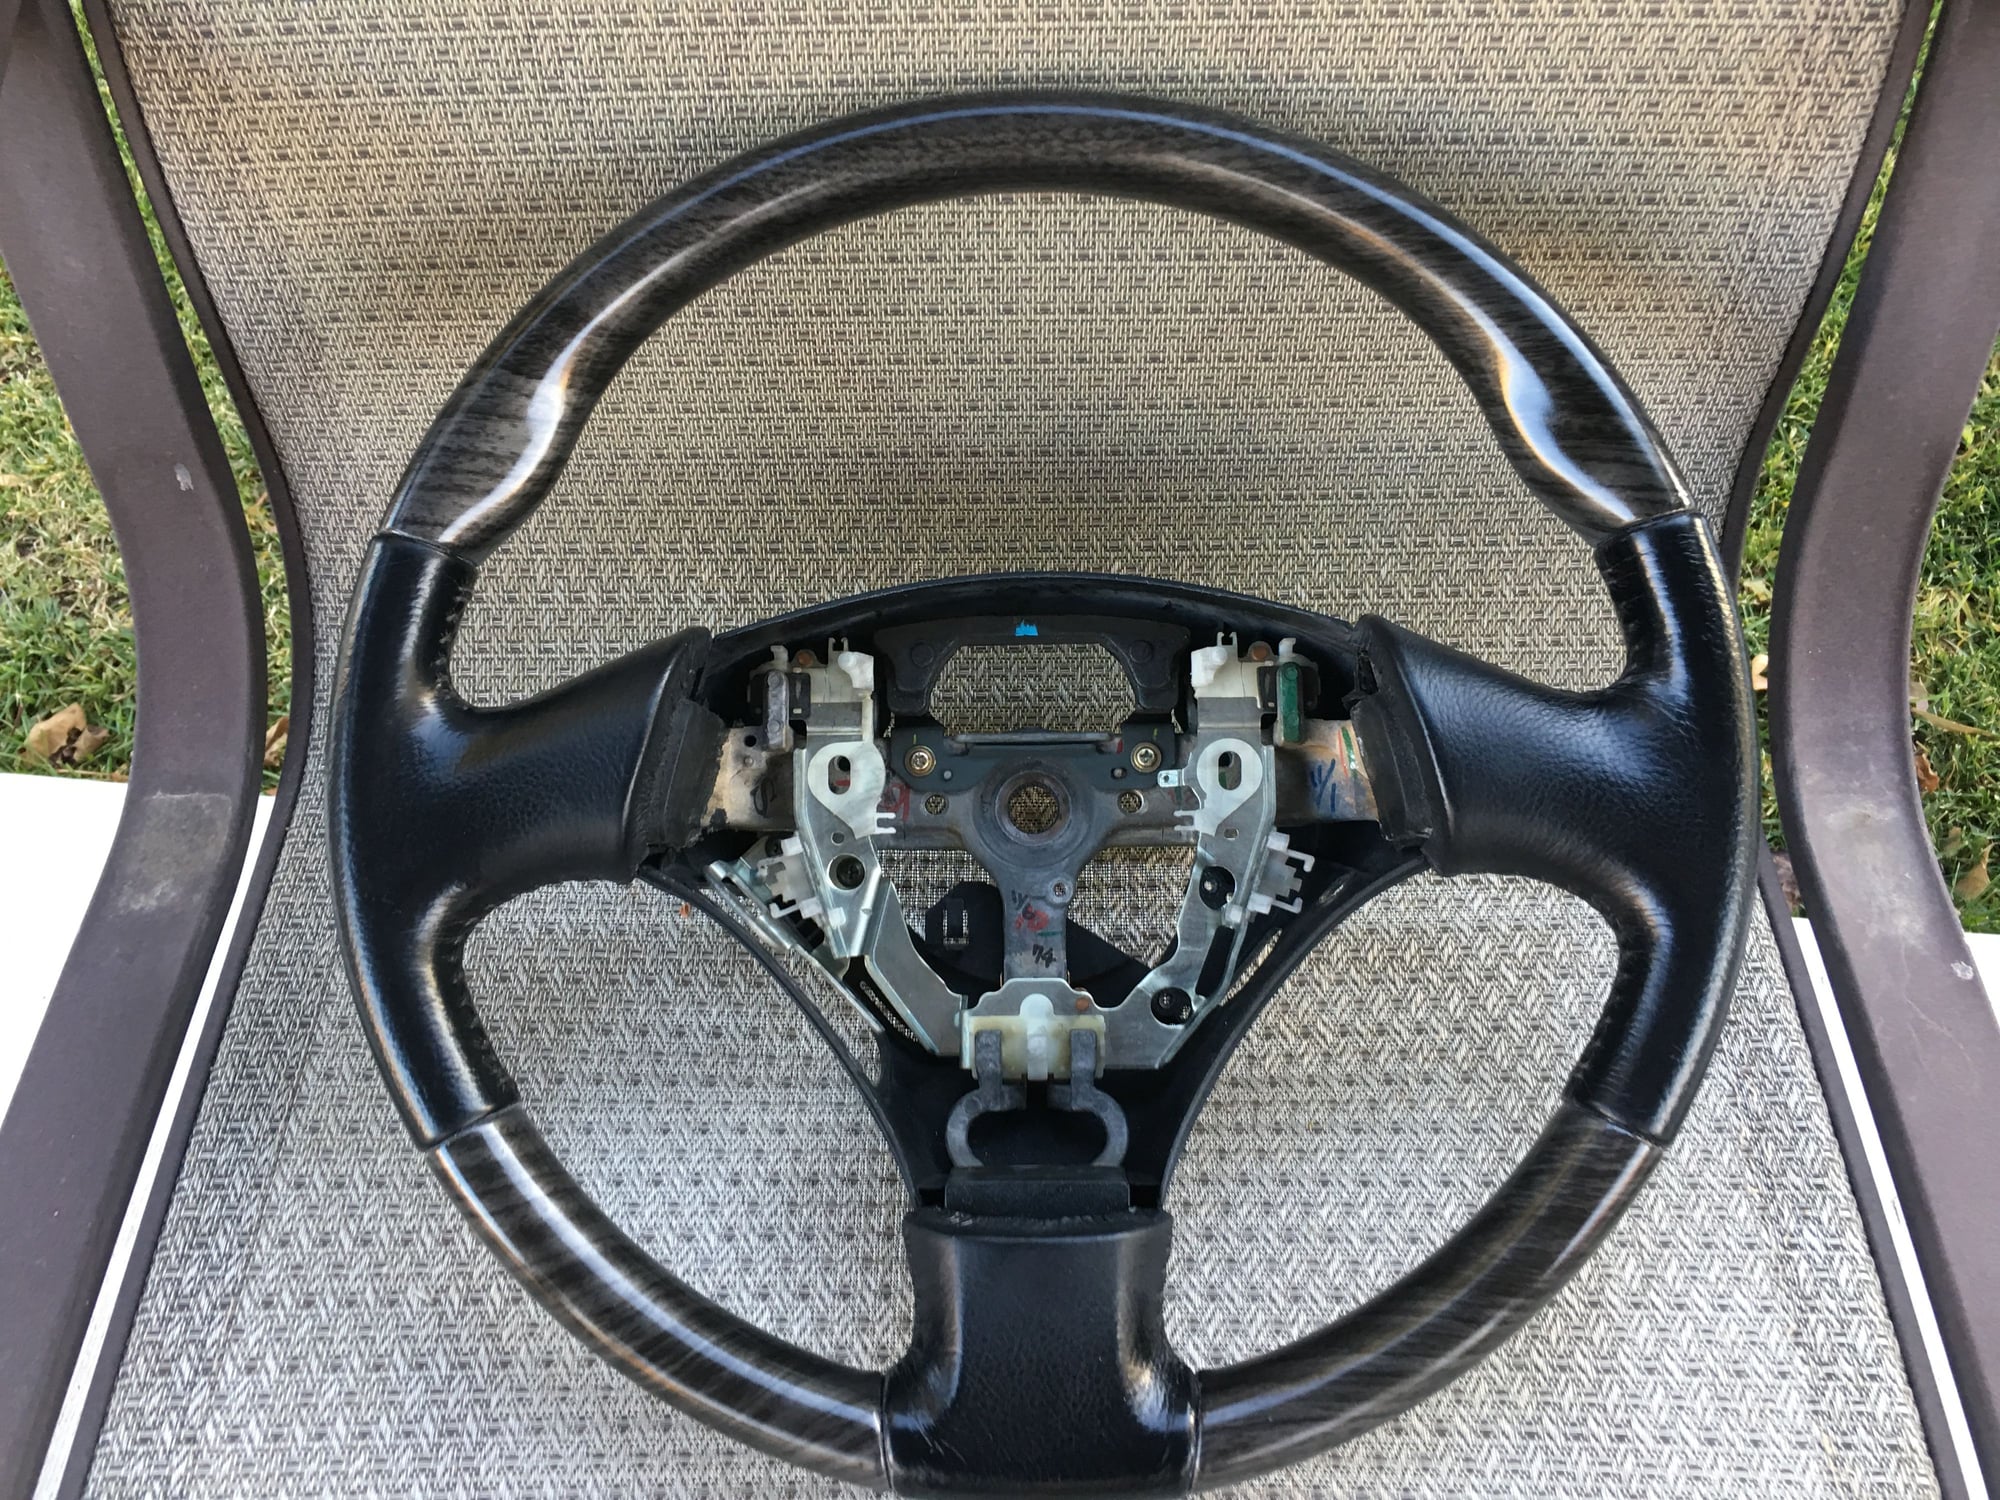 Interior/Upholstery - 2001 Gs430 hydro dipped wood steering wheel - Used - 1999 to 2005 Lexus GS430 - Midvale, UT 84047, United States